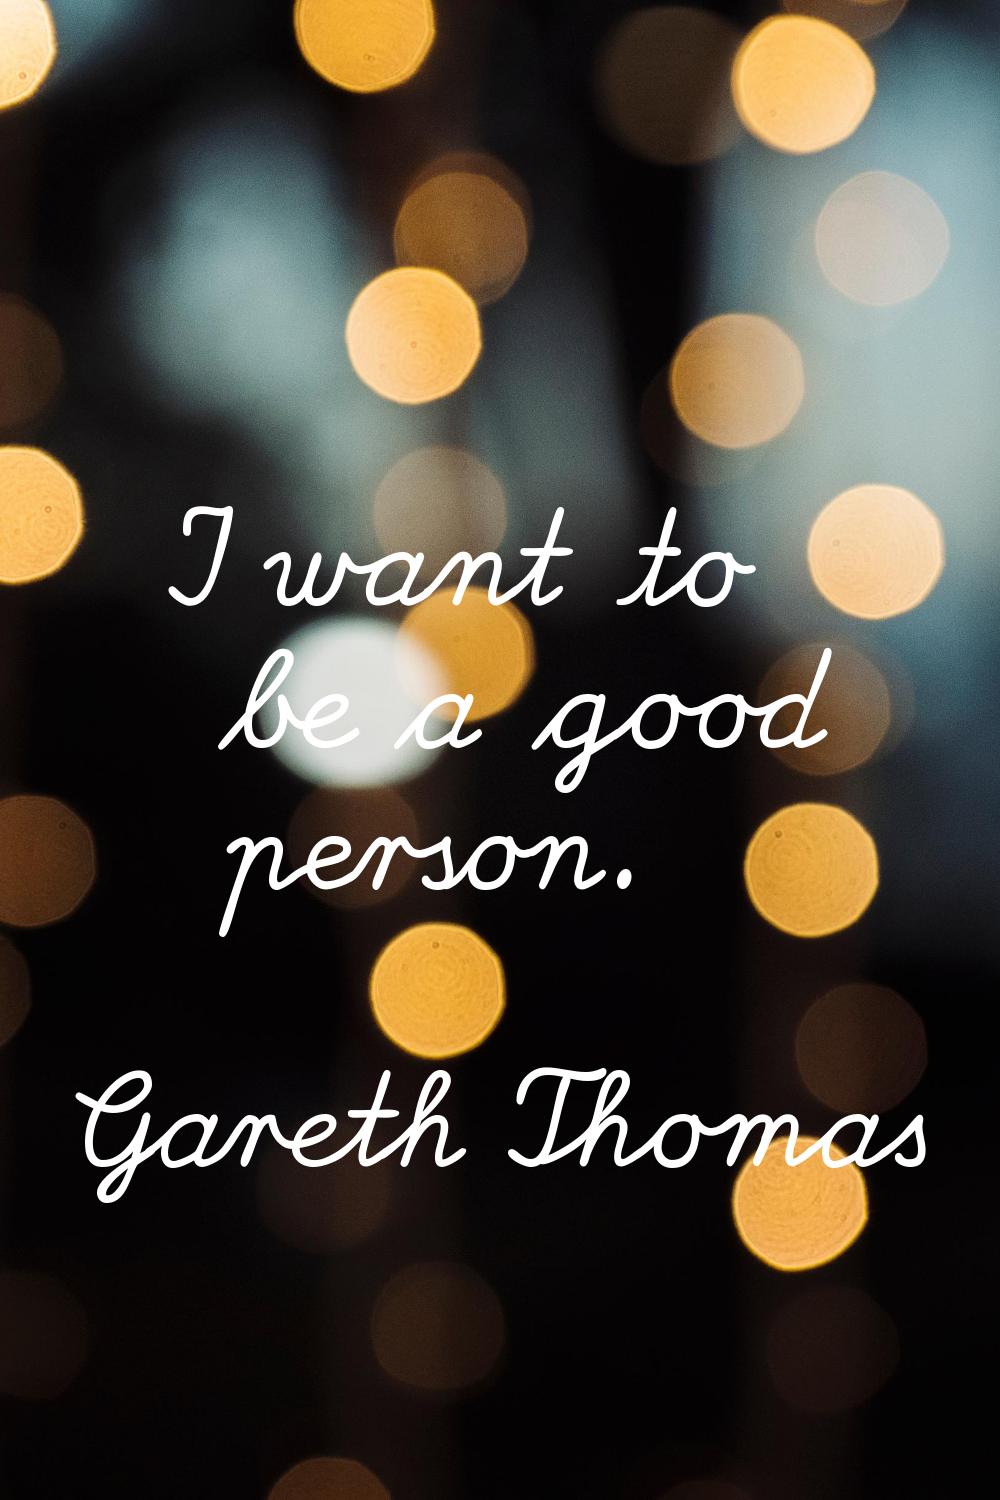 I want to be a good person.